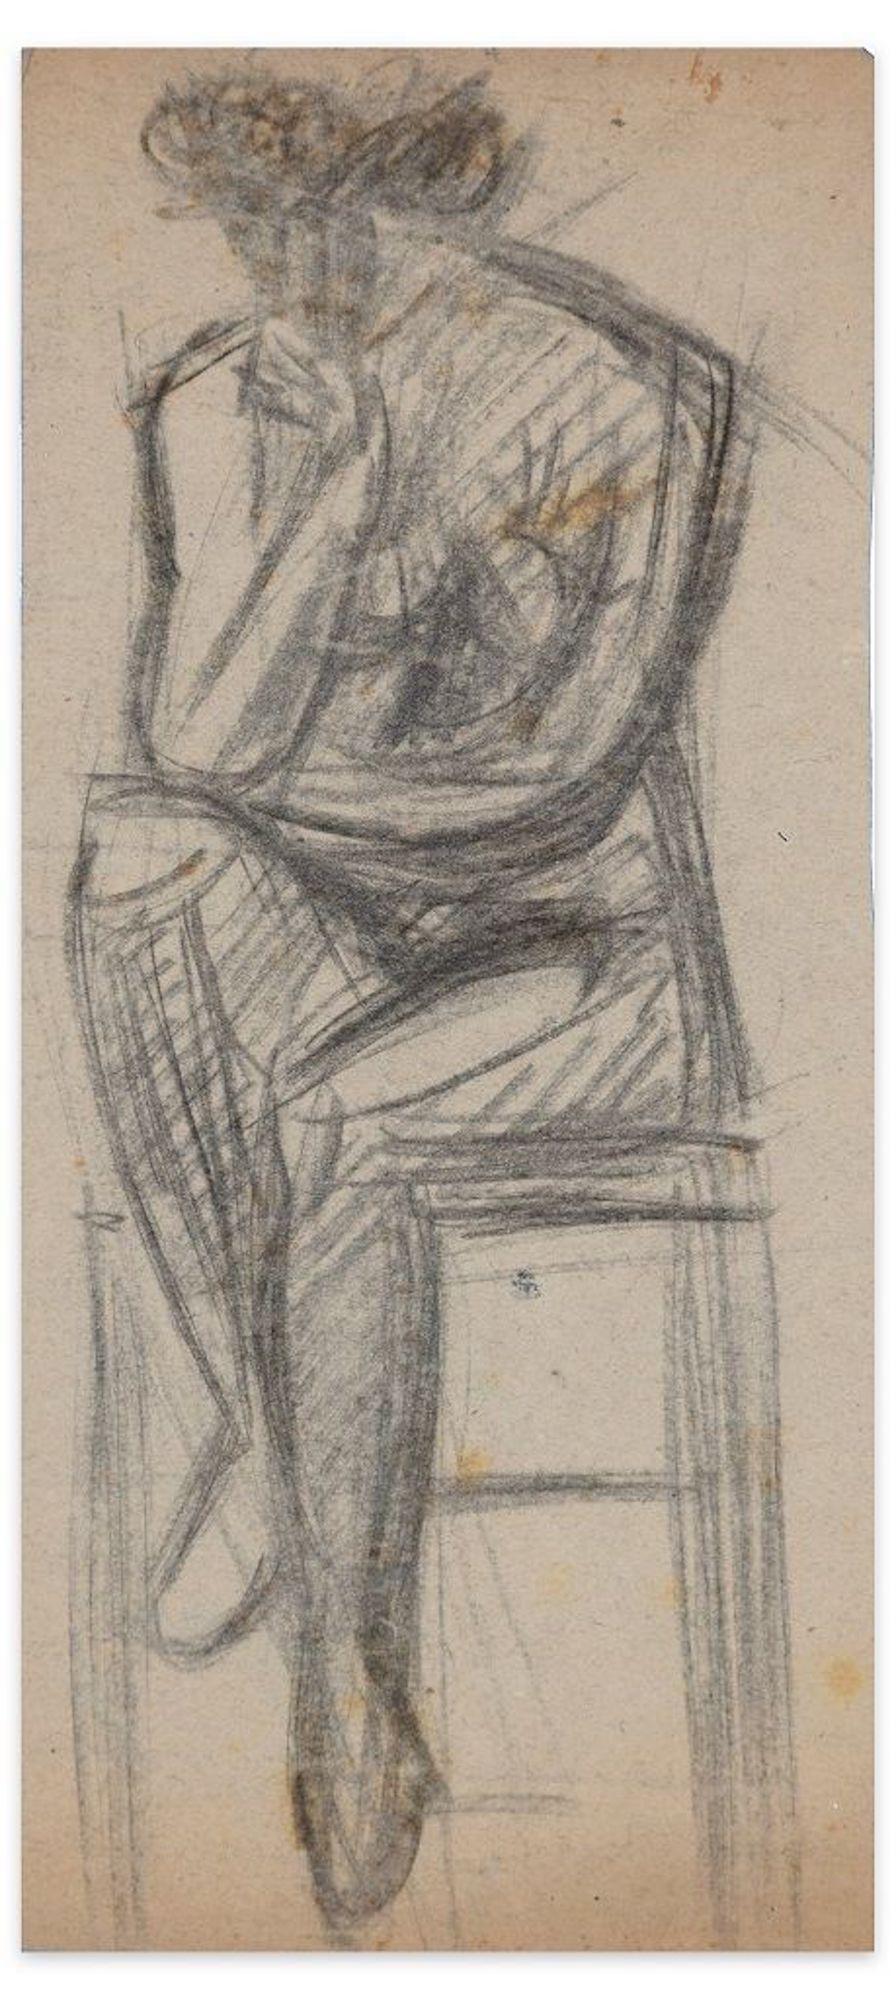 Sitting Nude - Original Charcoal Drawing - Early 20th Century - Art by Unknown